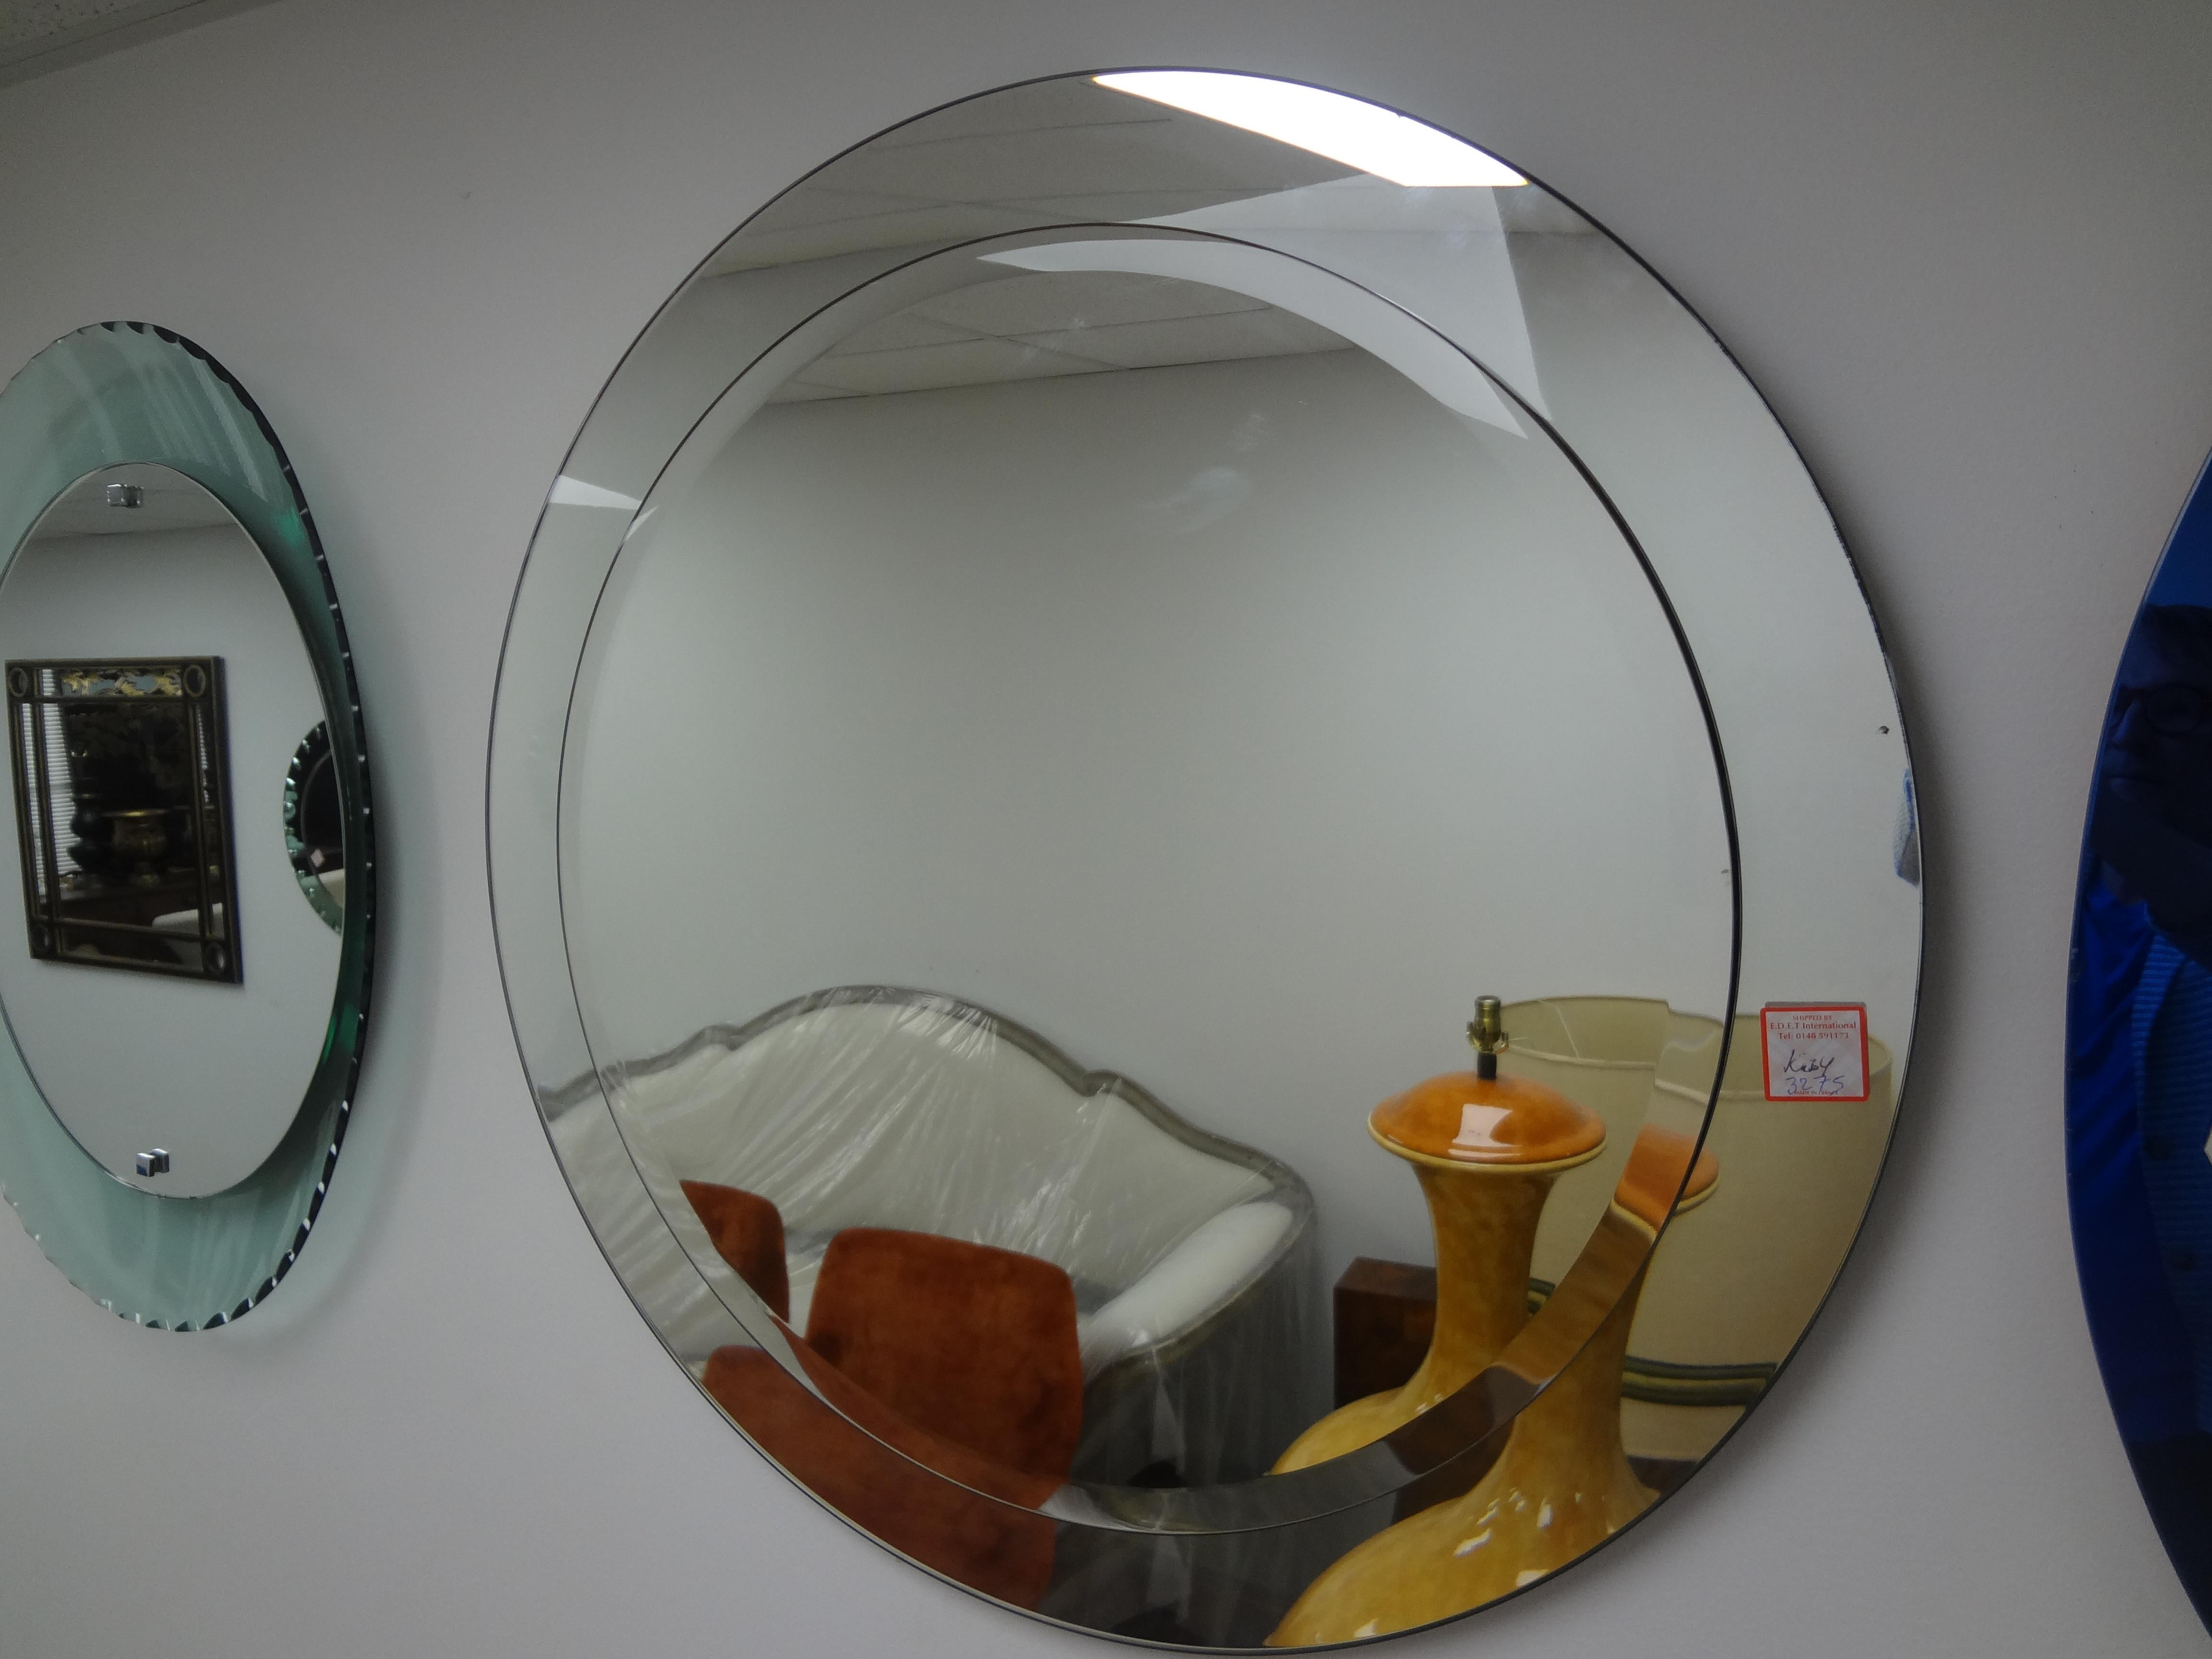 Italian Modern Fontana Arte Inspired Beveled Mirror.
Stunning Italian mid century modern round beveled mirror in the manner of Pietro Chiesa for Fontana Arte.
This mirror would be perfect over a console table, commode, or in a powder room setting.